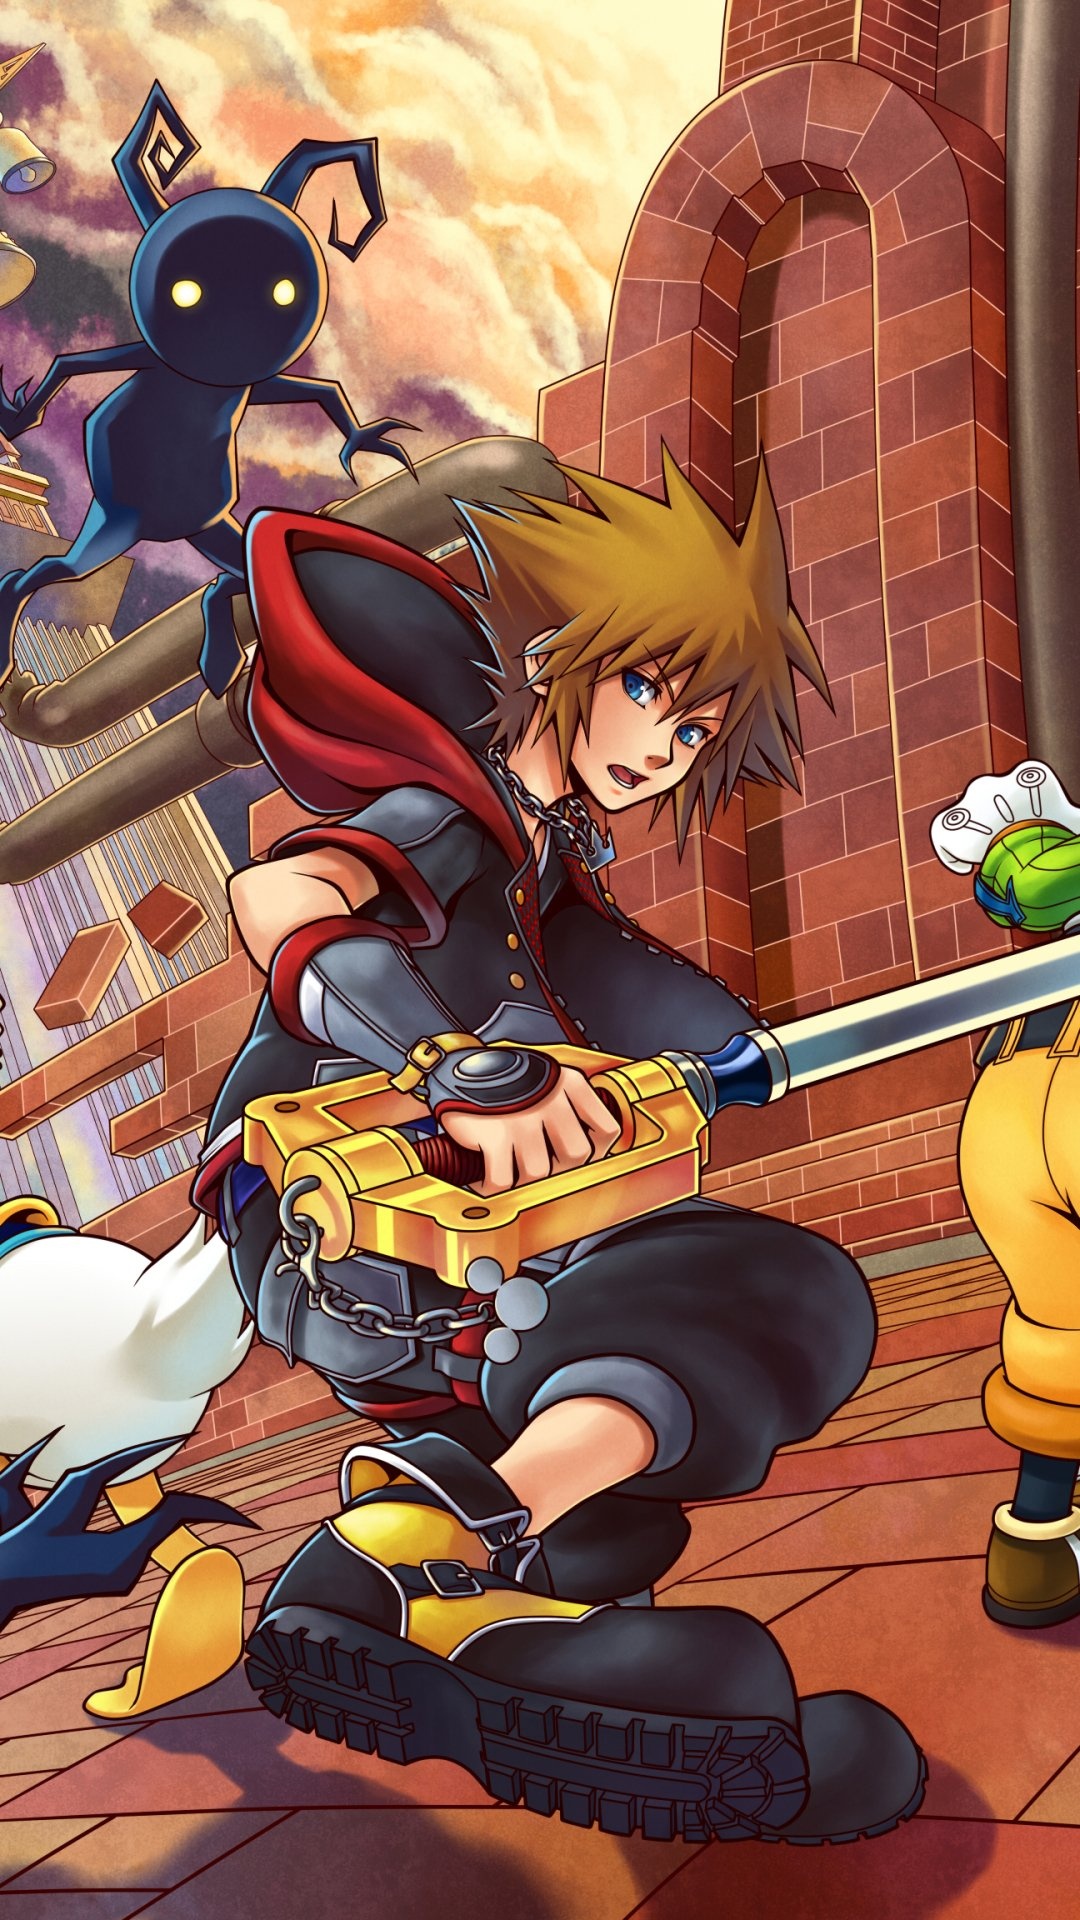 Kingdom Hearts III, Video game adventure, Exciting gameplay, Epic battles, 1080x1920 Full HD Handy